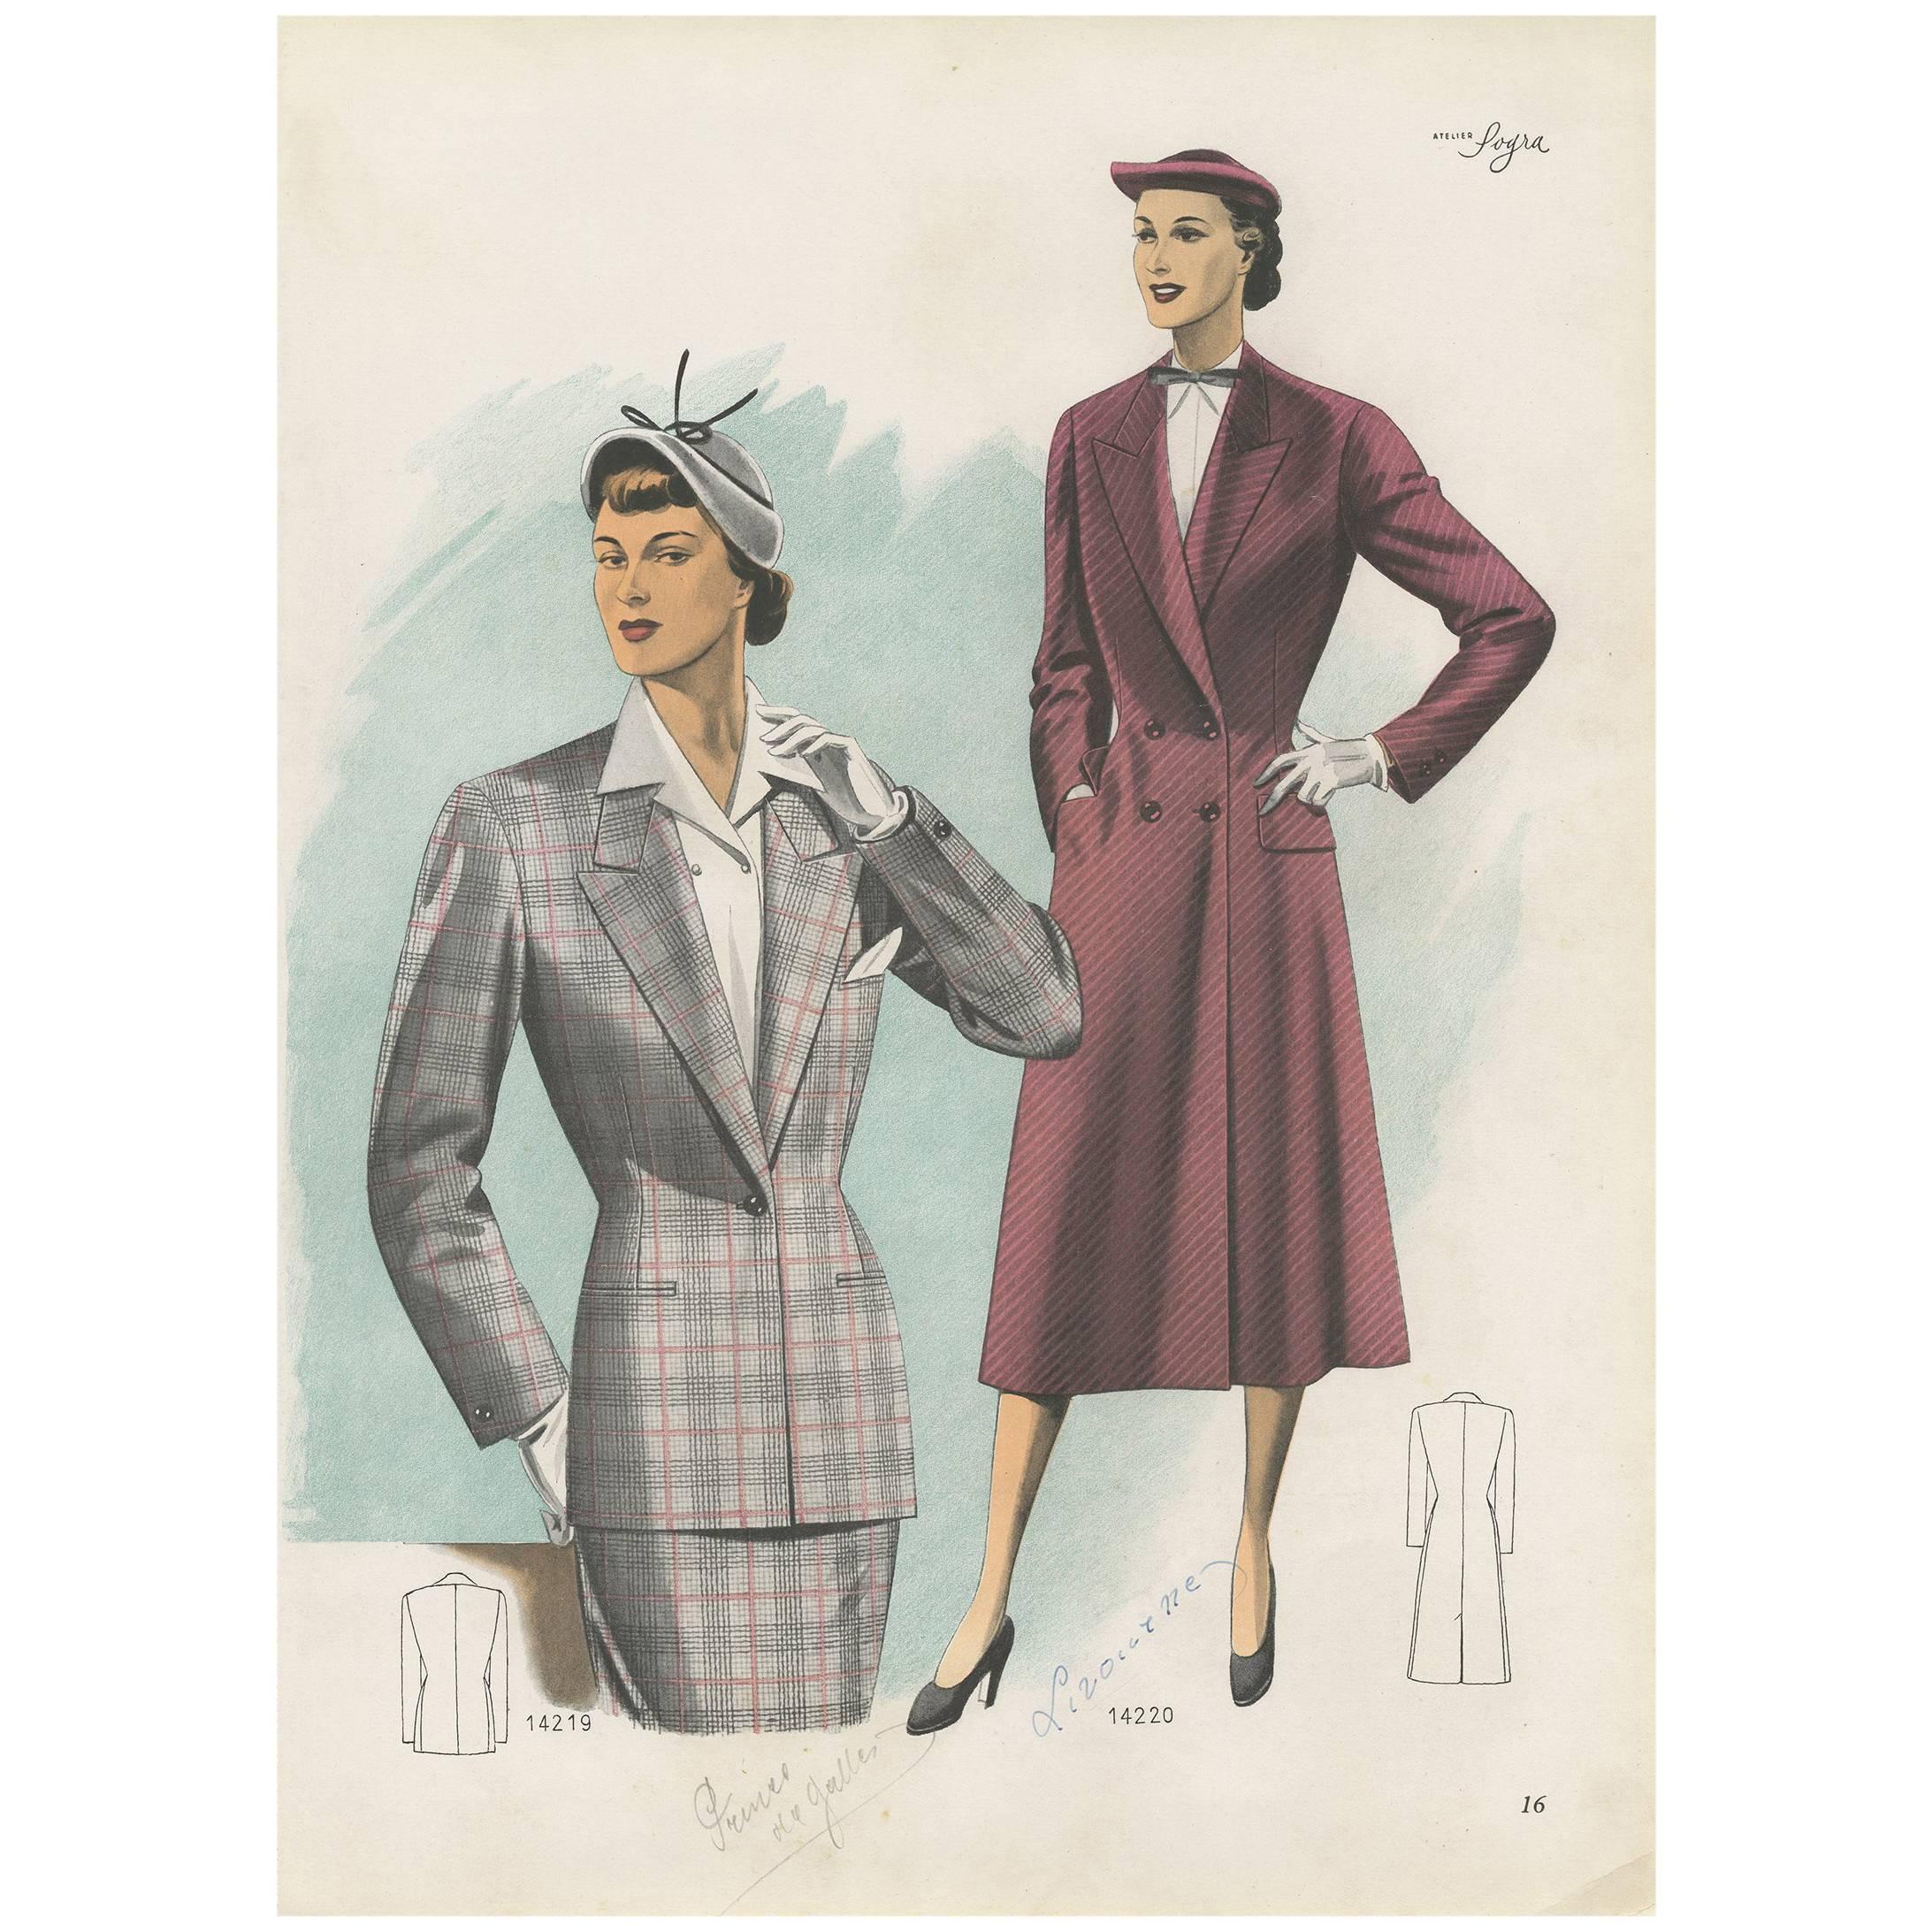 Vintage Fashion Print 'Pl. 14219' published in Ladies Styles, 1951 For Sale